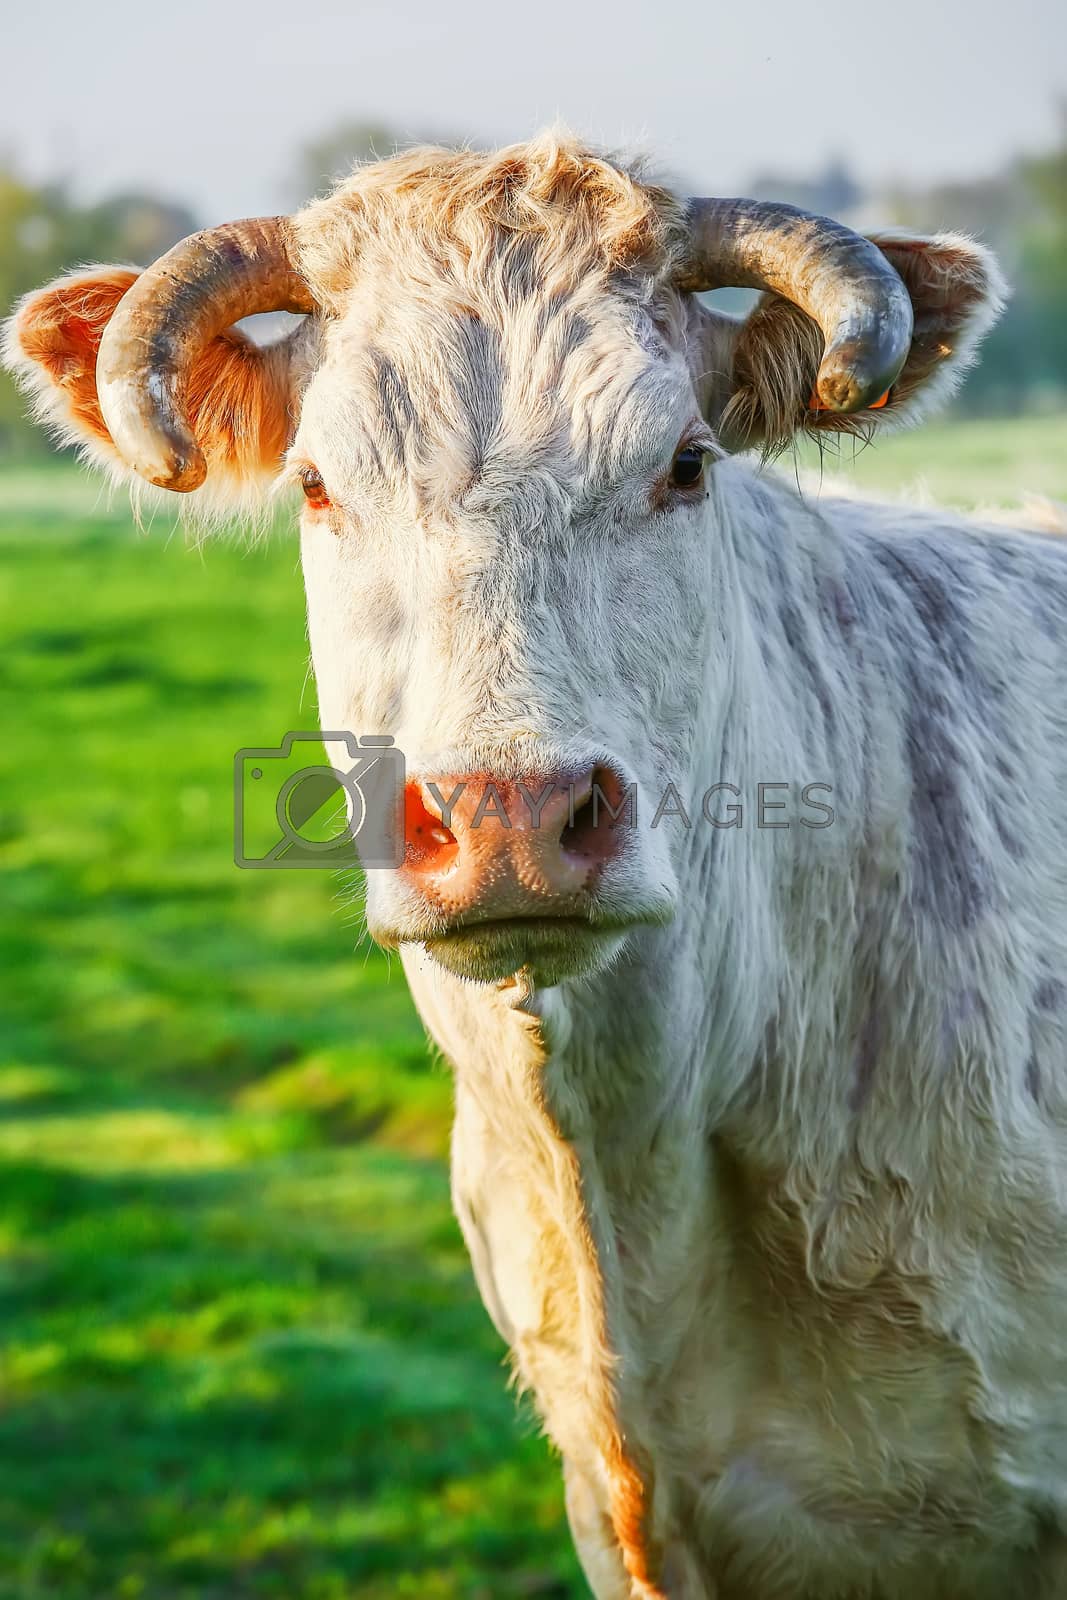 Royalty free image of A blonde d'Aquitaine pedigree cow in a green natural meadow by pixinoo